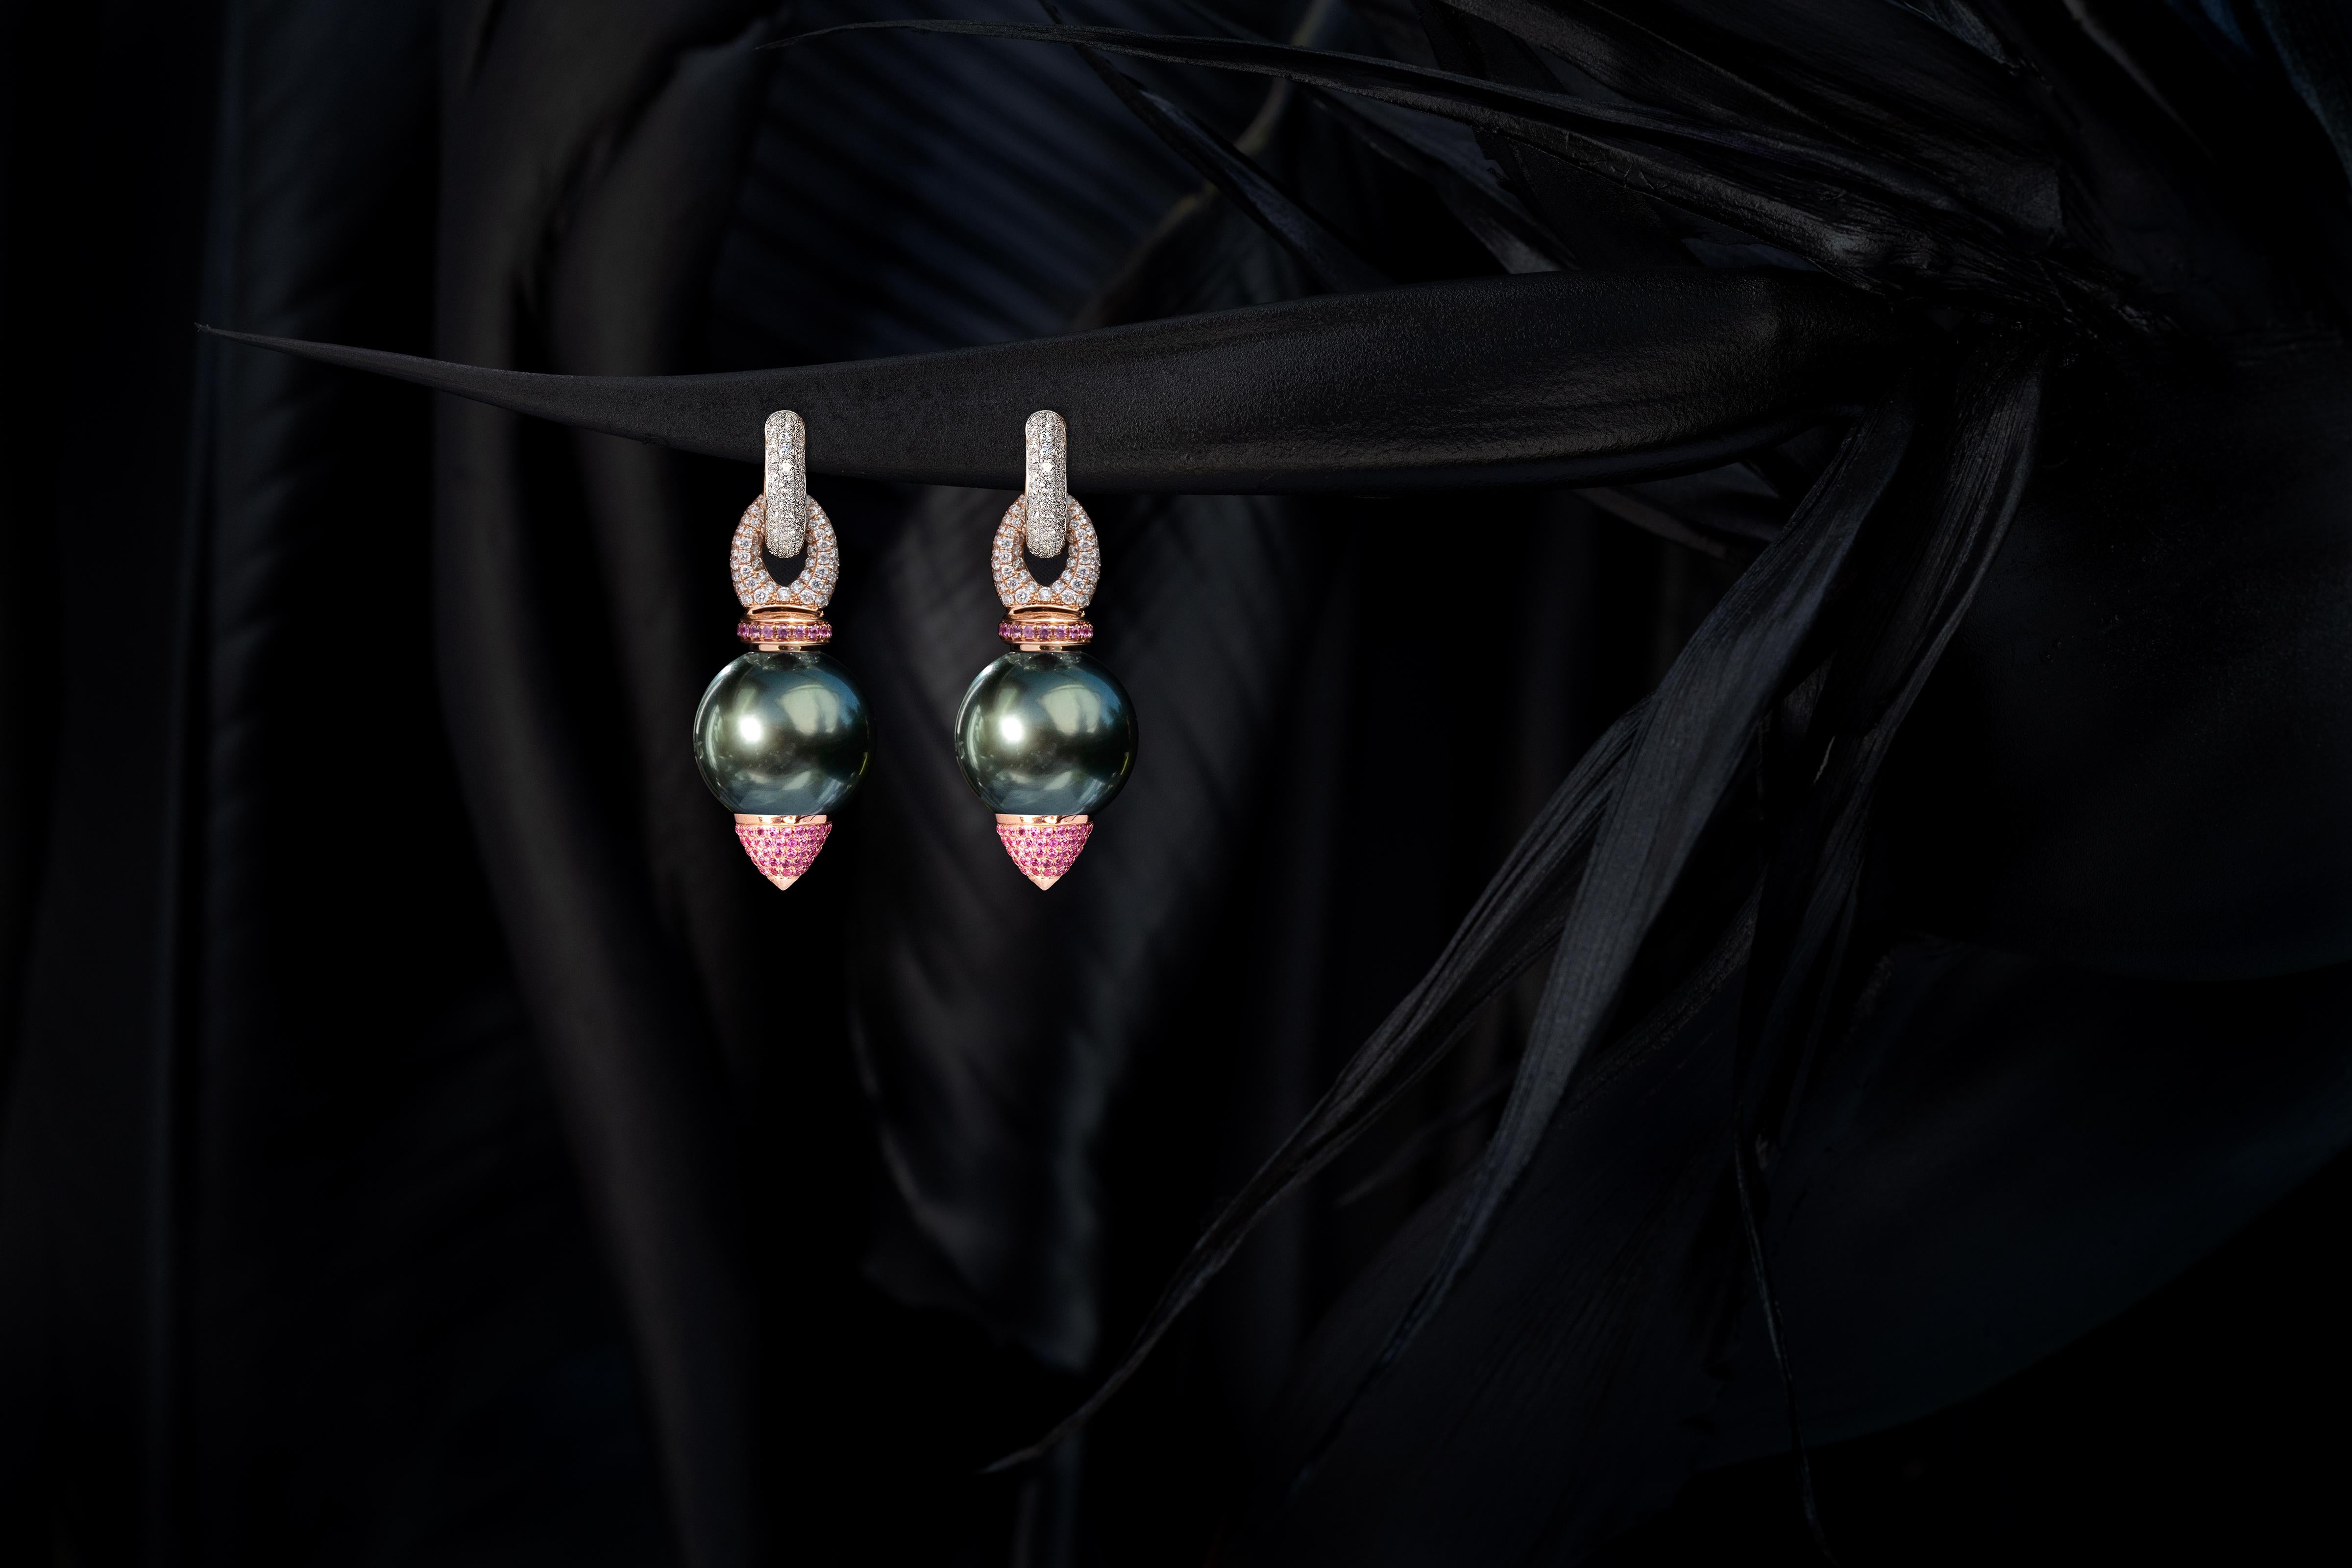 15mm peacock tone Tahitian Pearl (AAA quality) earrings with pink sapphires pavé cones in 18 Karat rose Gold and white Diamonds and pink Sapphires sliders. 
Shown on 18 Karat yellow Gold + white Diamond hoops.
None in stock available.
Lead time for